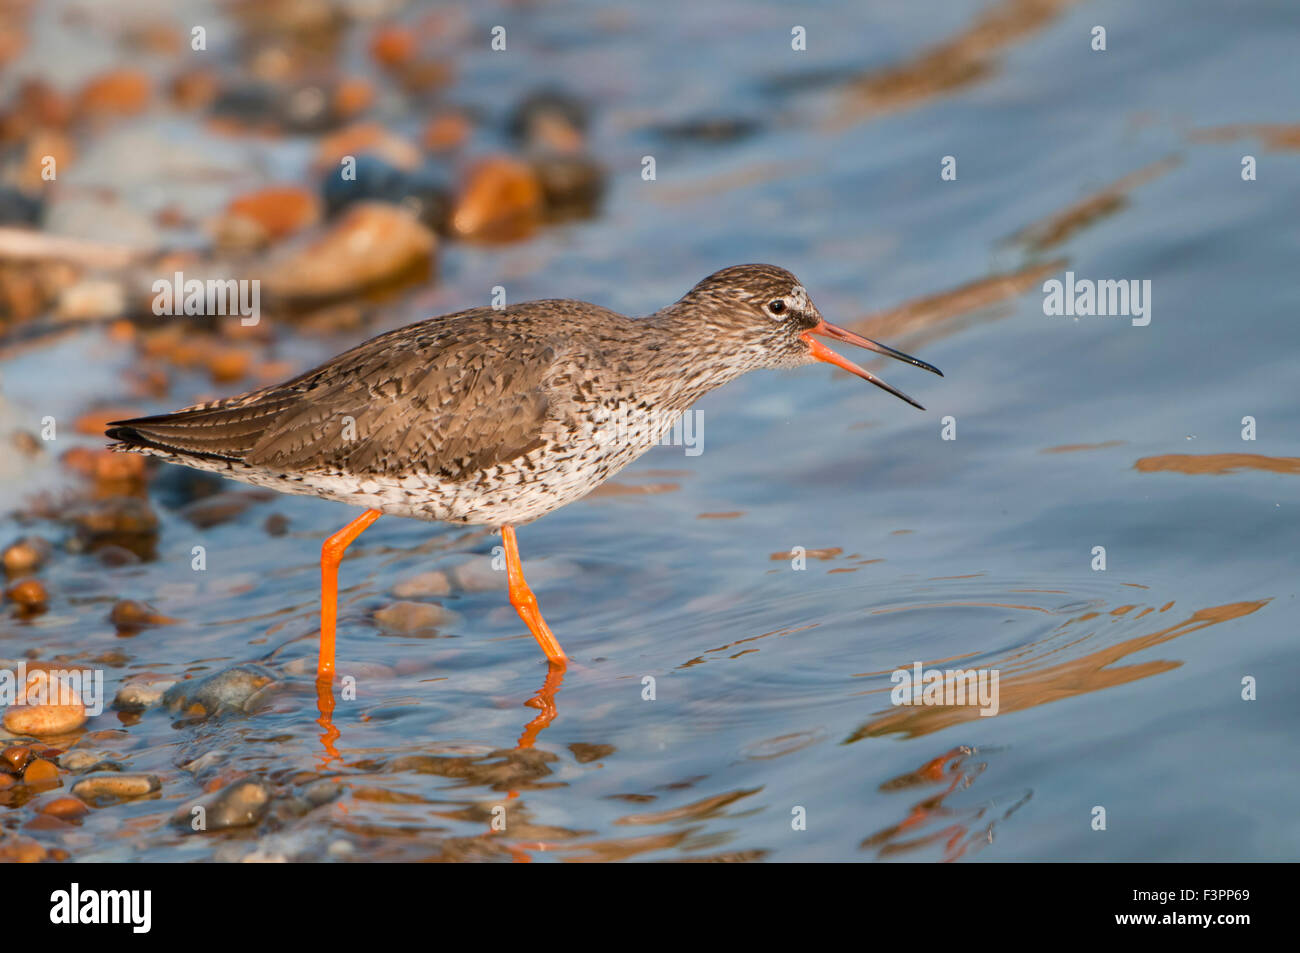 A single Redshank feeding at the water's edge in sun with blue water. Rye Harbour Nature Reserve, East Sussex, UK Stock Photo